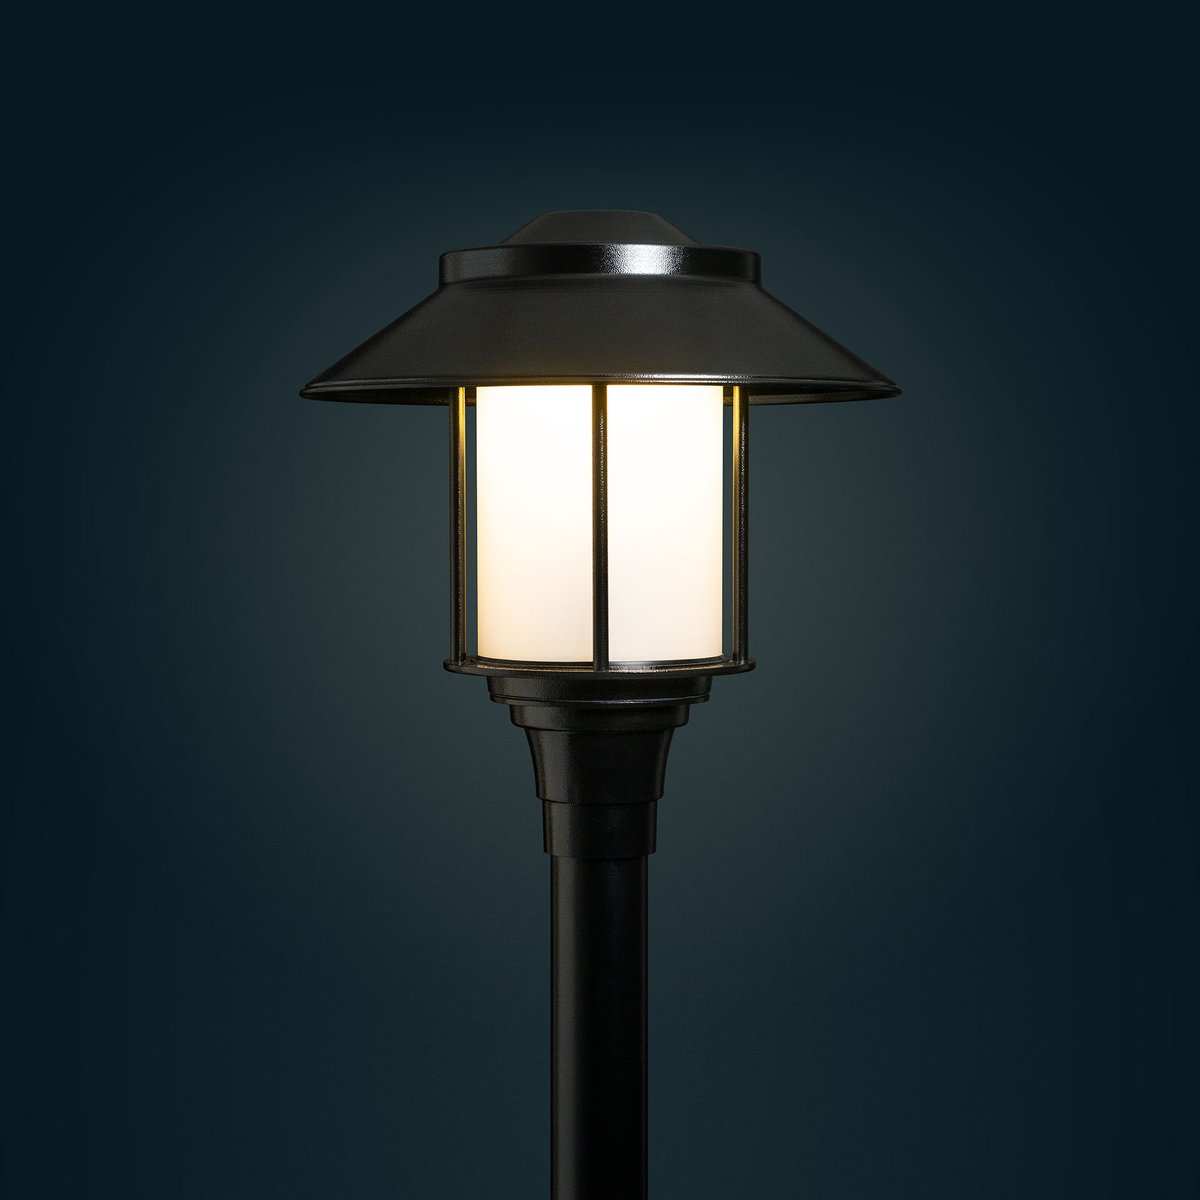 Elencia upholds Cyclone’s reputation for lasting durability and it meets a long list of specifier demands including high output per wattage and multiple distribution types.

Learn more about Elencia:
cyclonelighting.com/products/exter…

#streetlighting #pathwaylighting #urbanrenewal